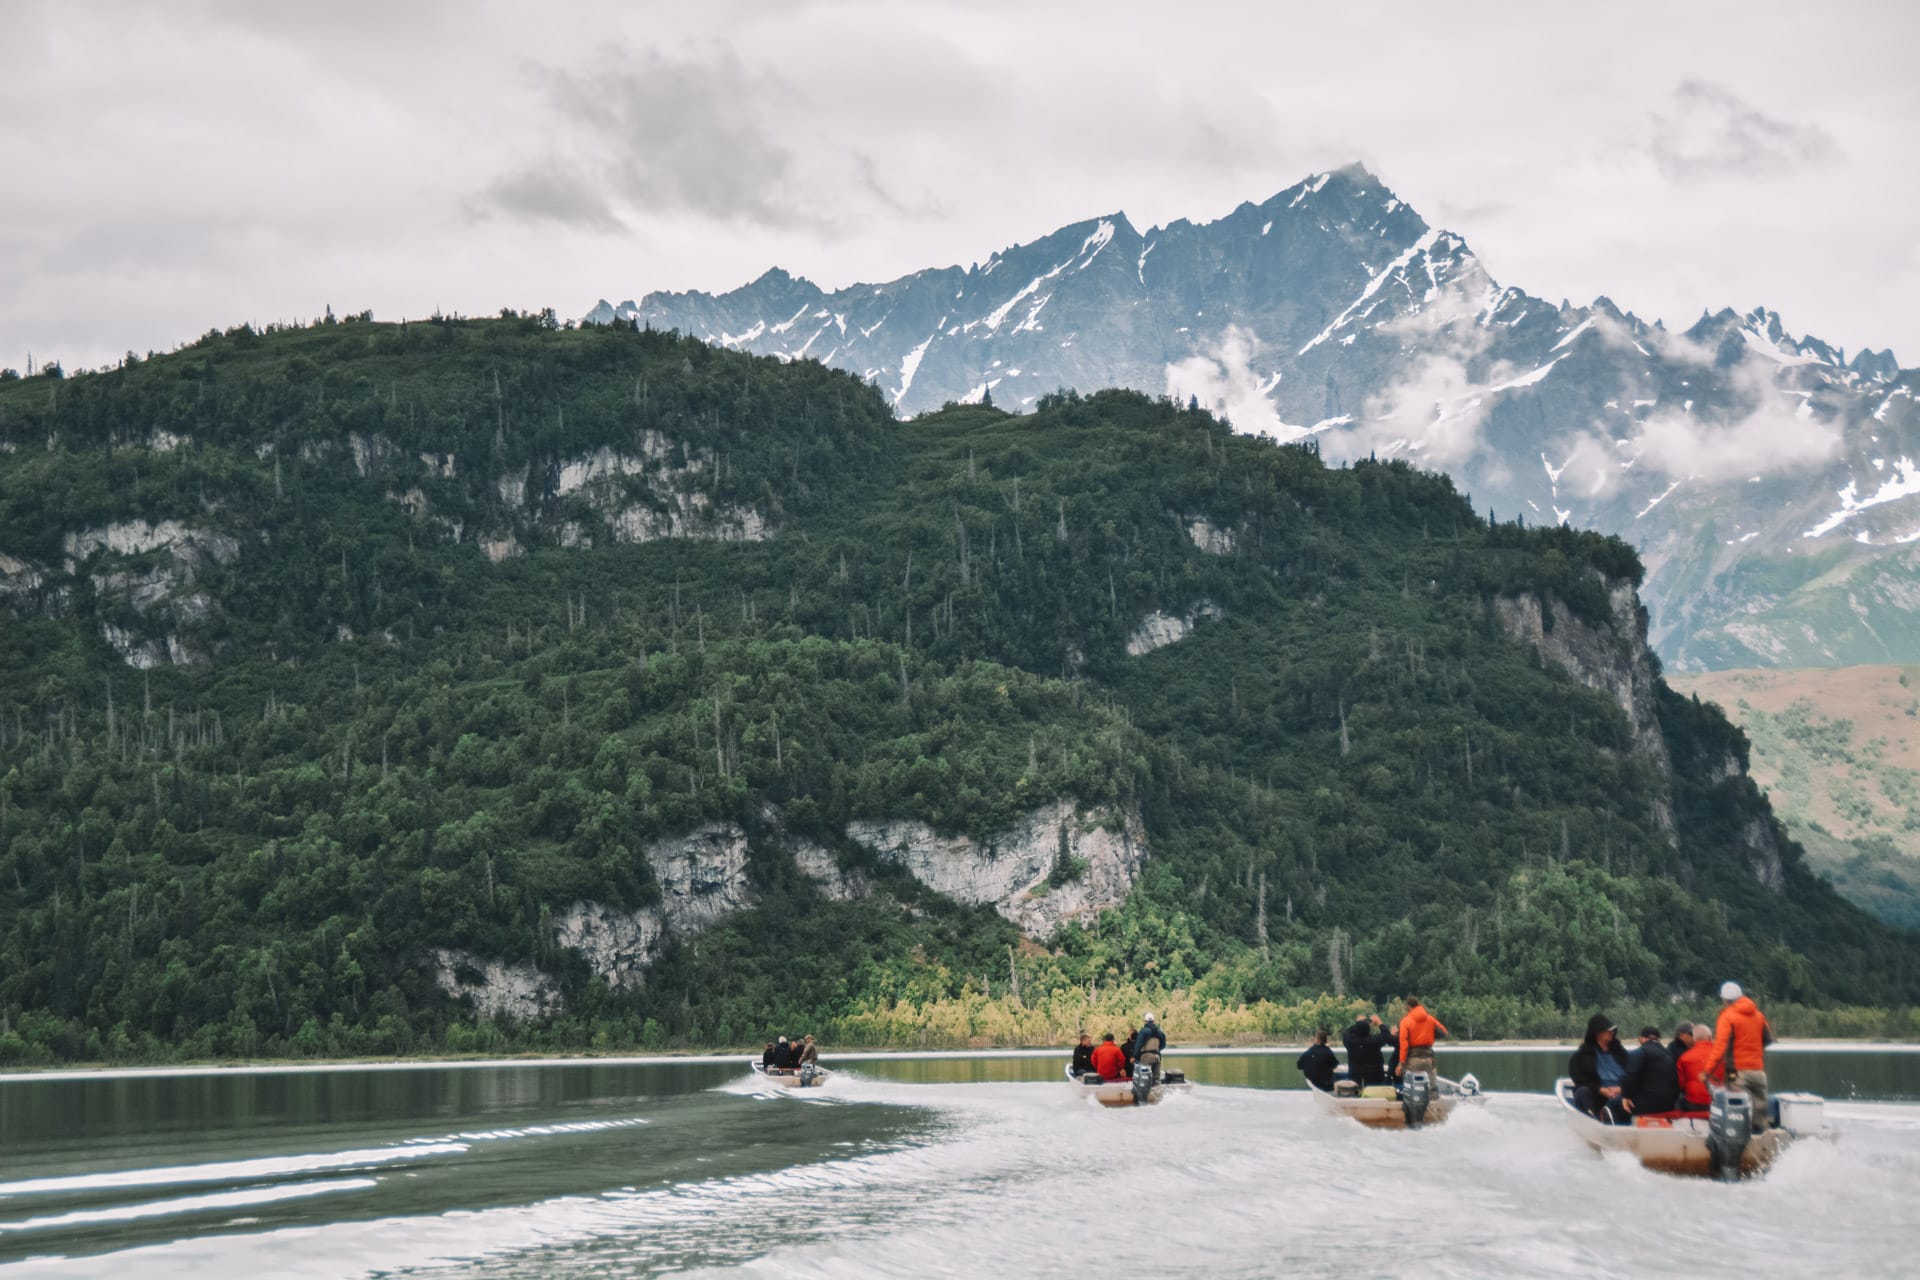 Salmon fishing in Alaska for incentive winners as a reward and recognition experience